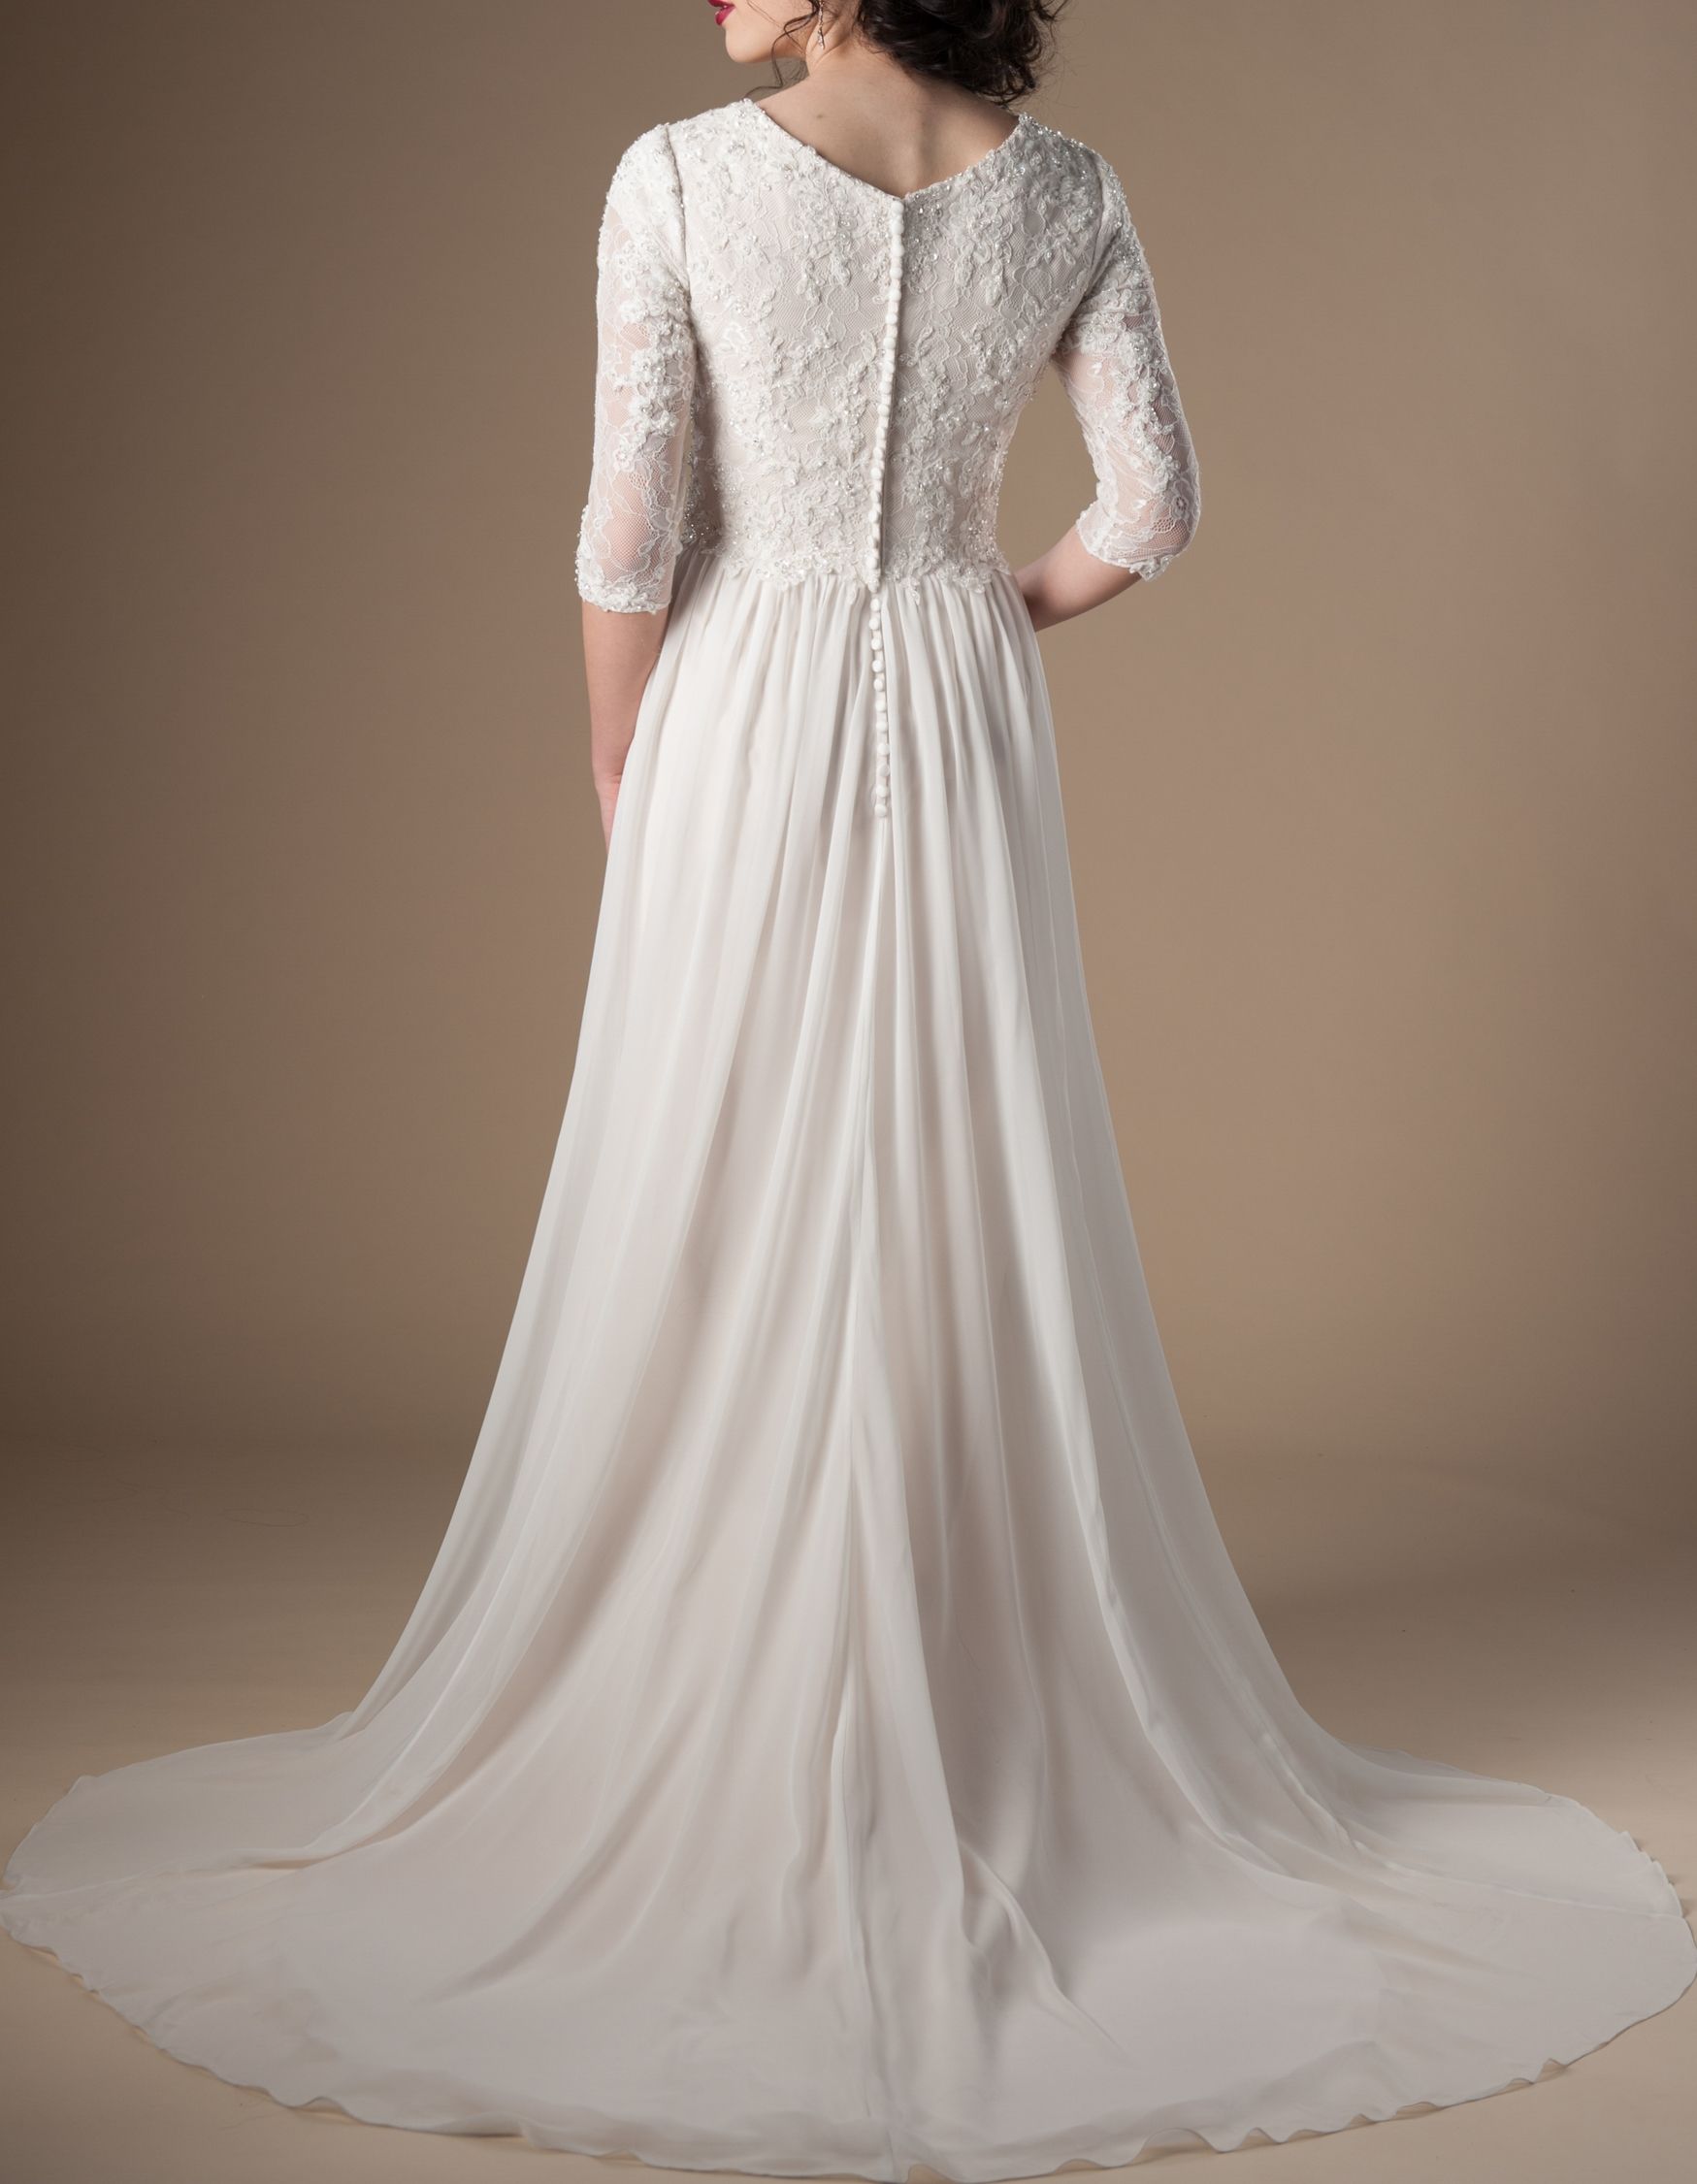 Modest Champagne Country Wedding Dress Bohemian Boho 3/4 Sleeves Bridal Gown 